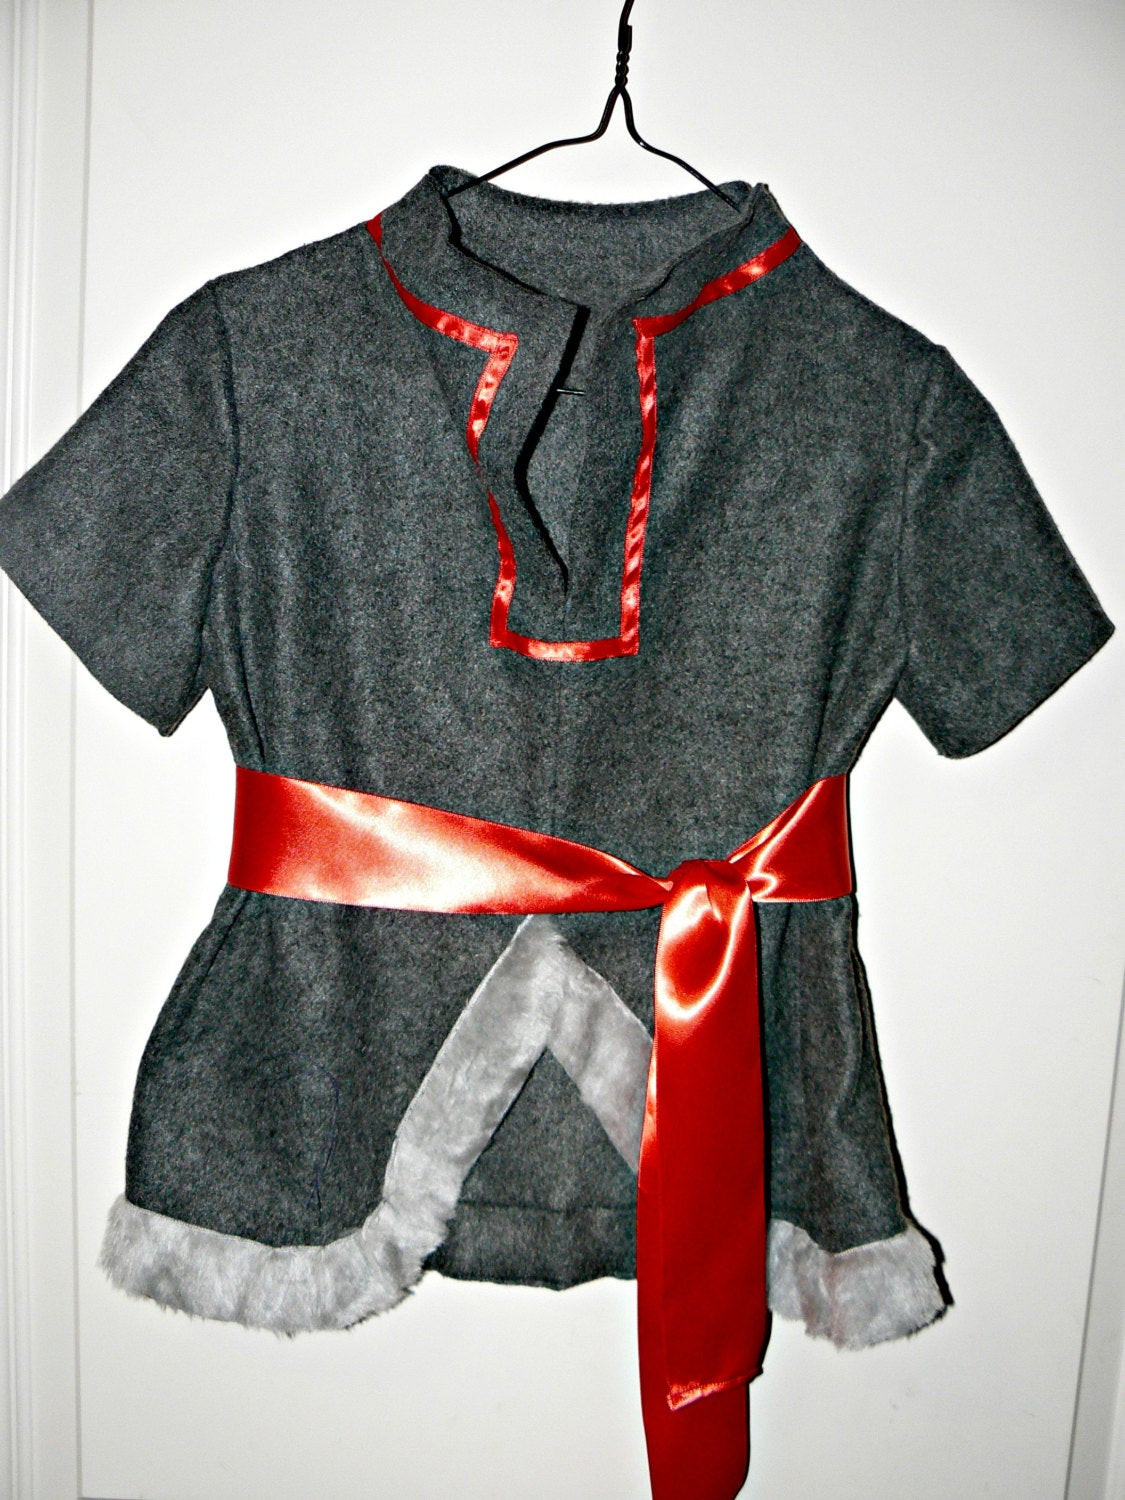 DIY Kristoff Costume
 Adult Kristoff inspired tunic costume with red sash by